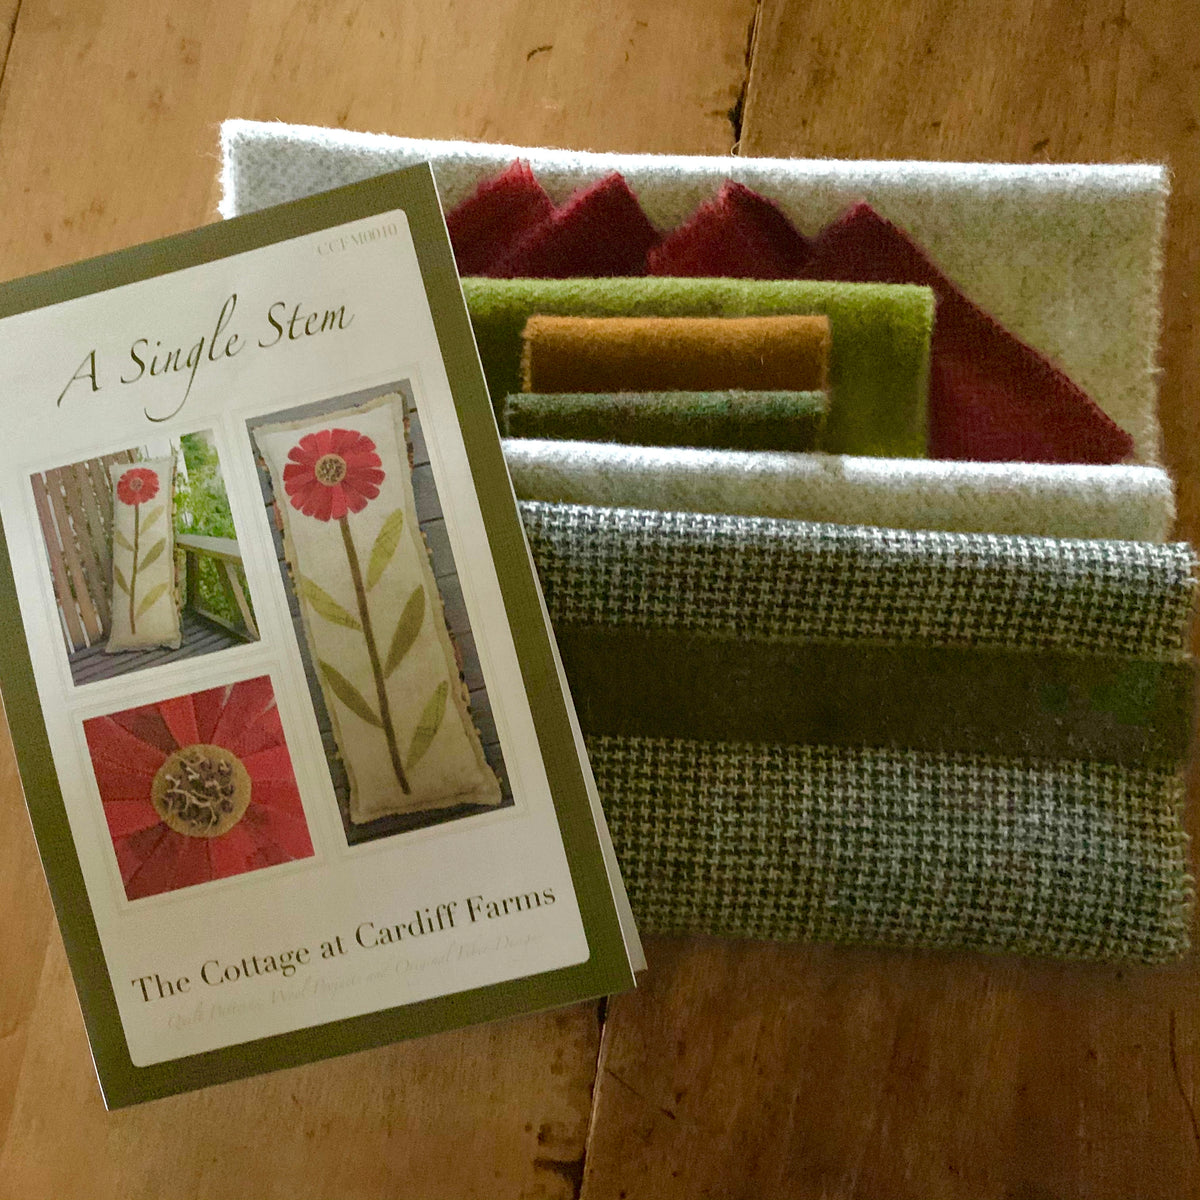 The Cottage at Cardiff Farms - A Single Stem Bench Pillow Wool Kit